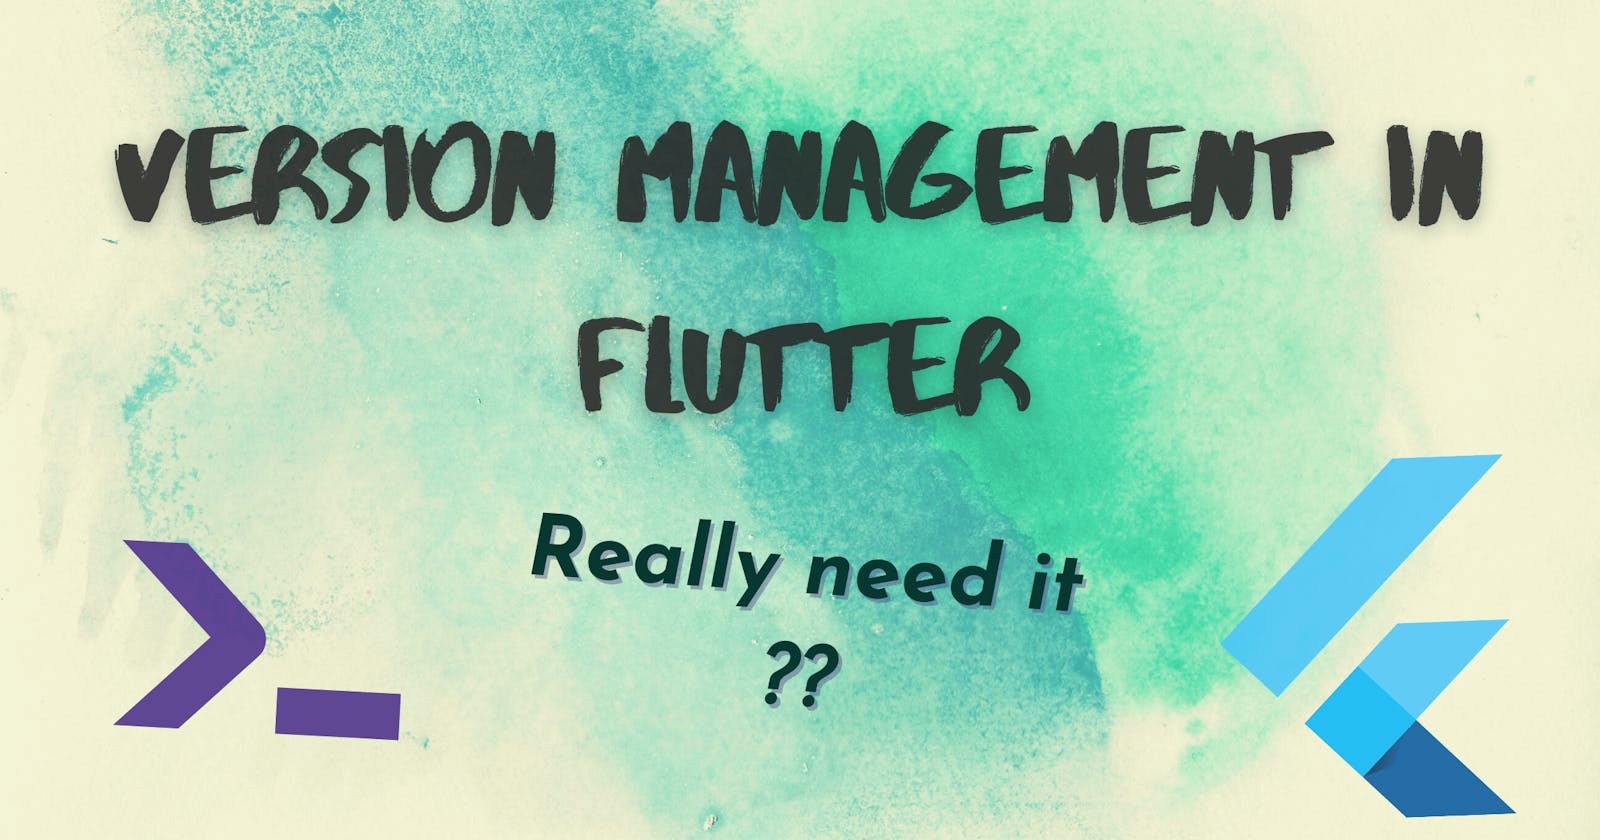 Flutter Version individual for every project - Flutter Version Manager